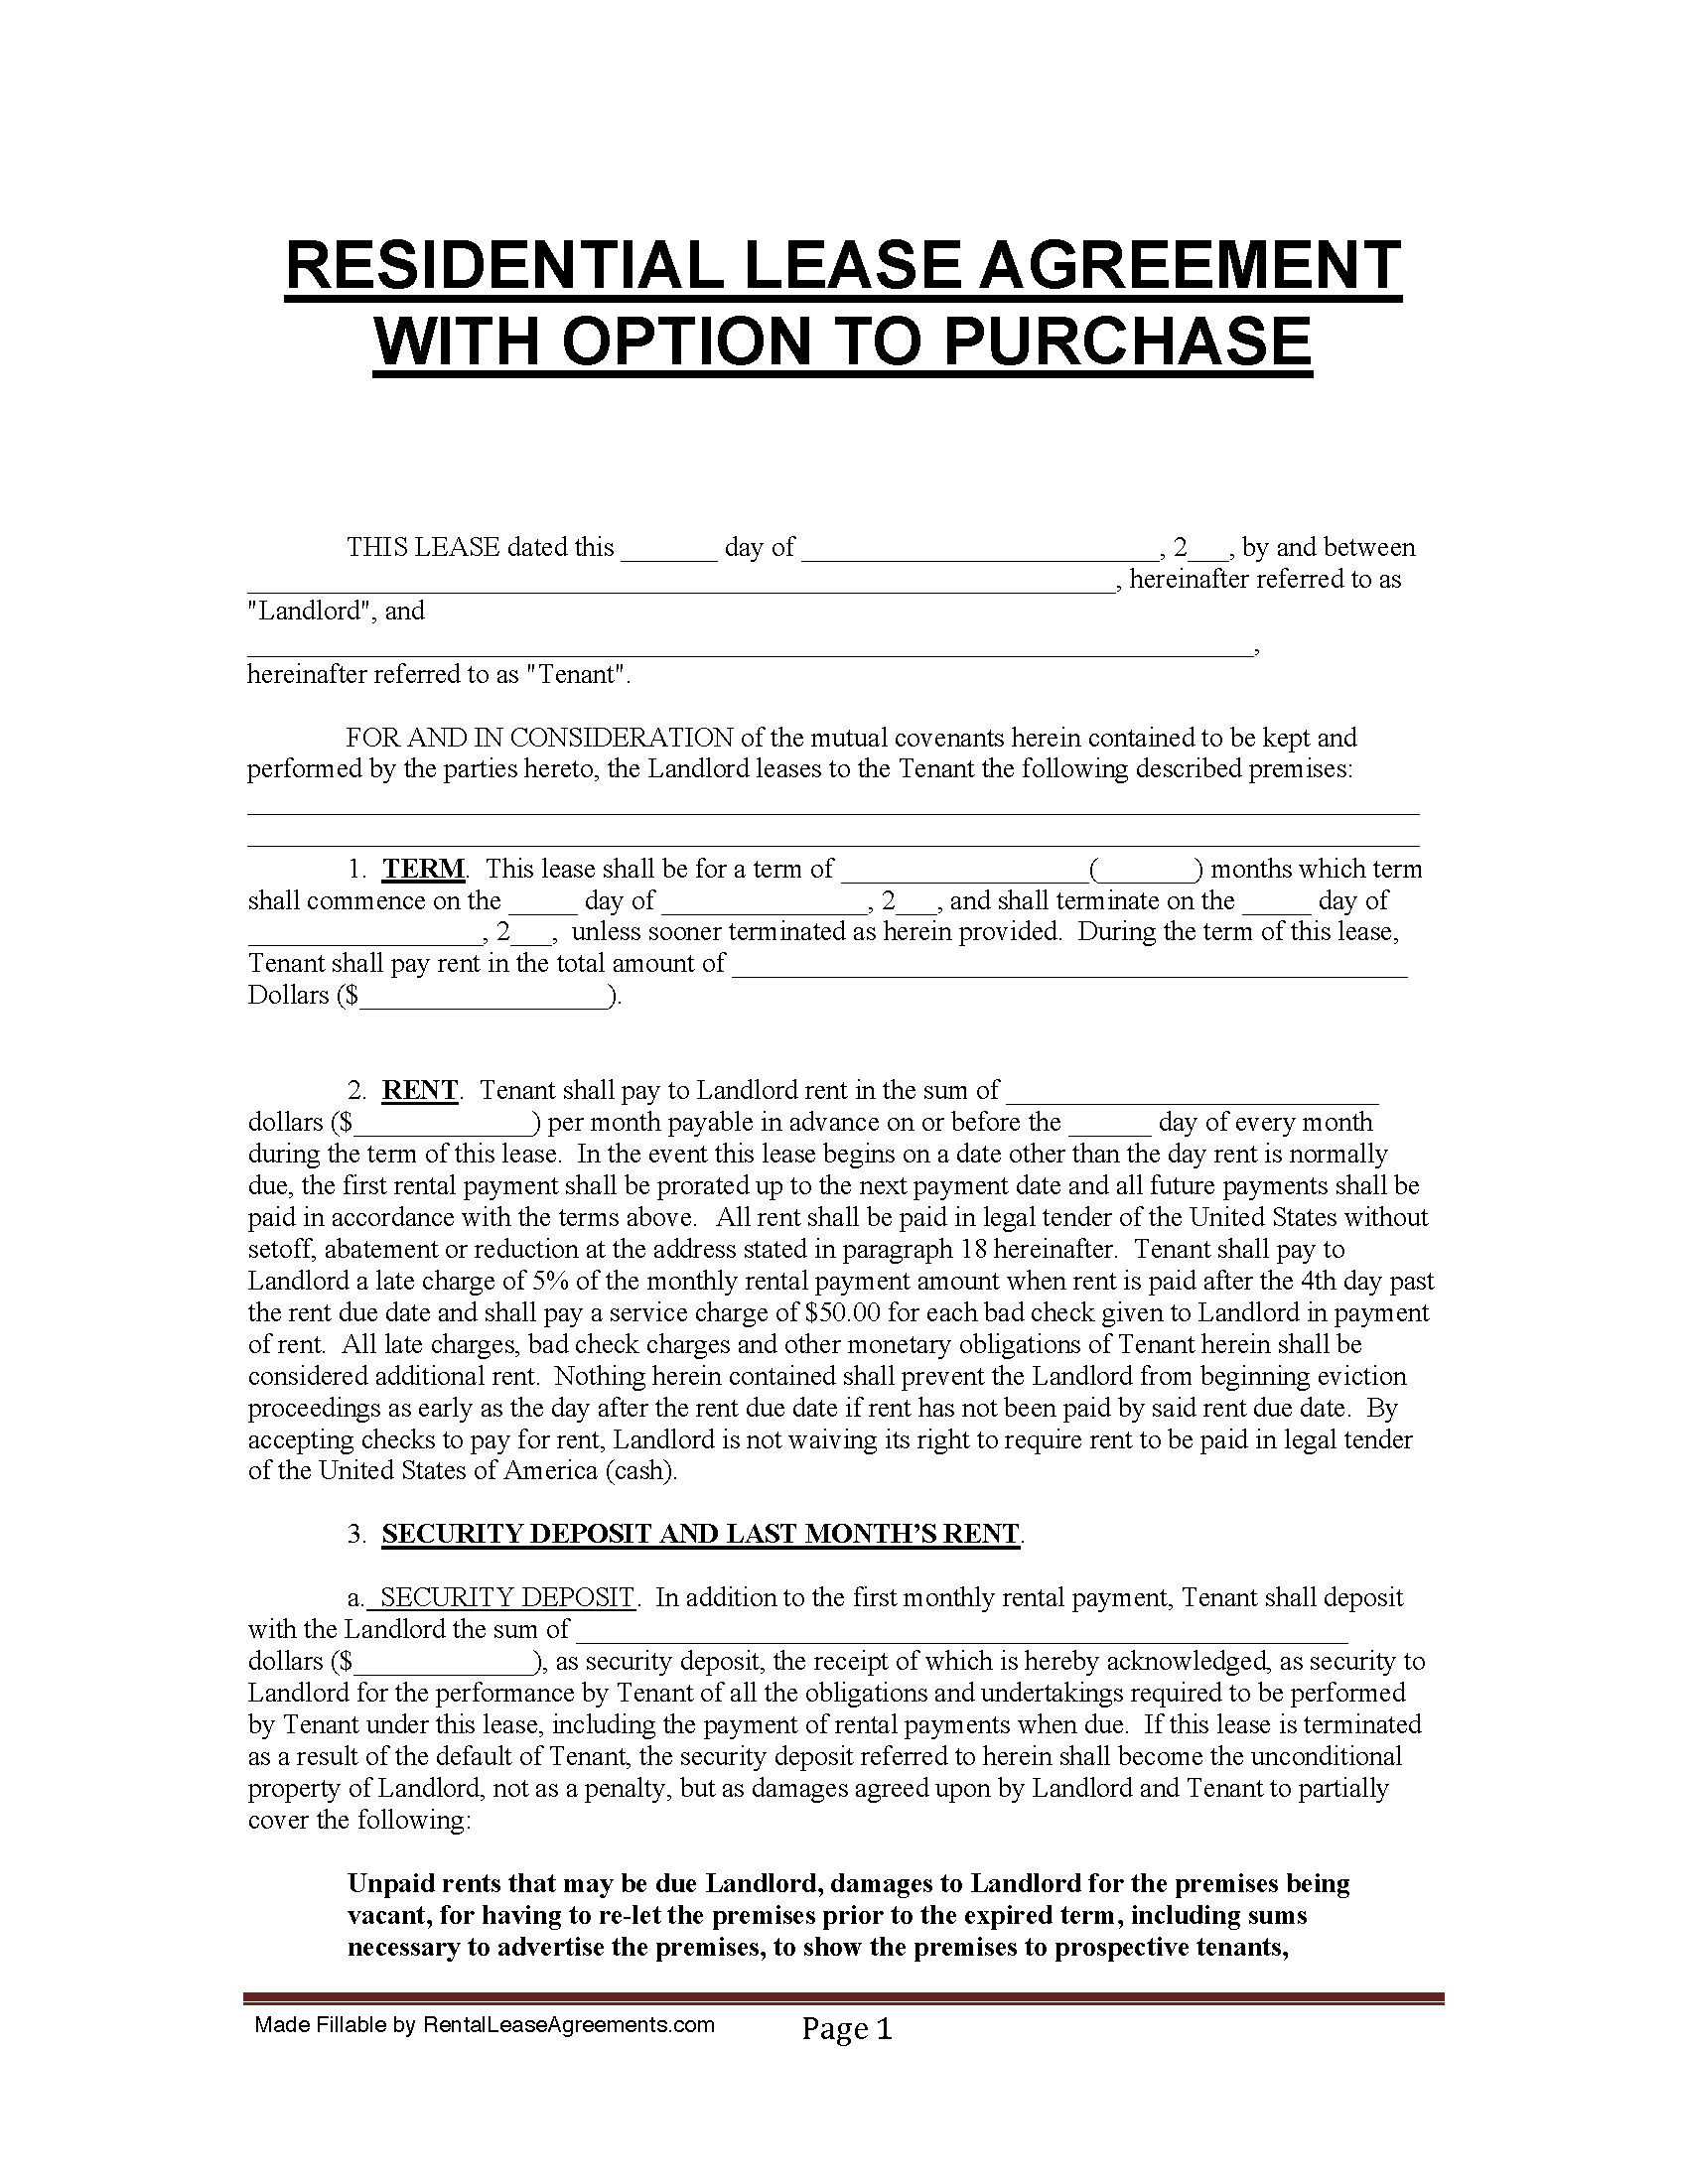 Free florida residential lease agreement form download zebradesigner 2.5.0 download free